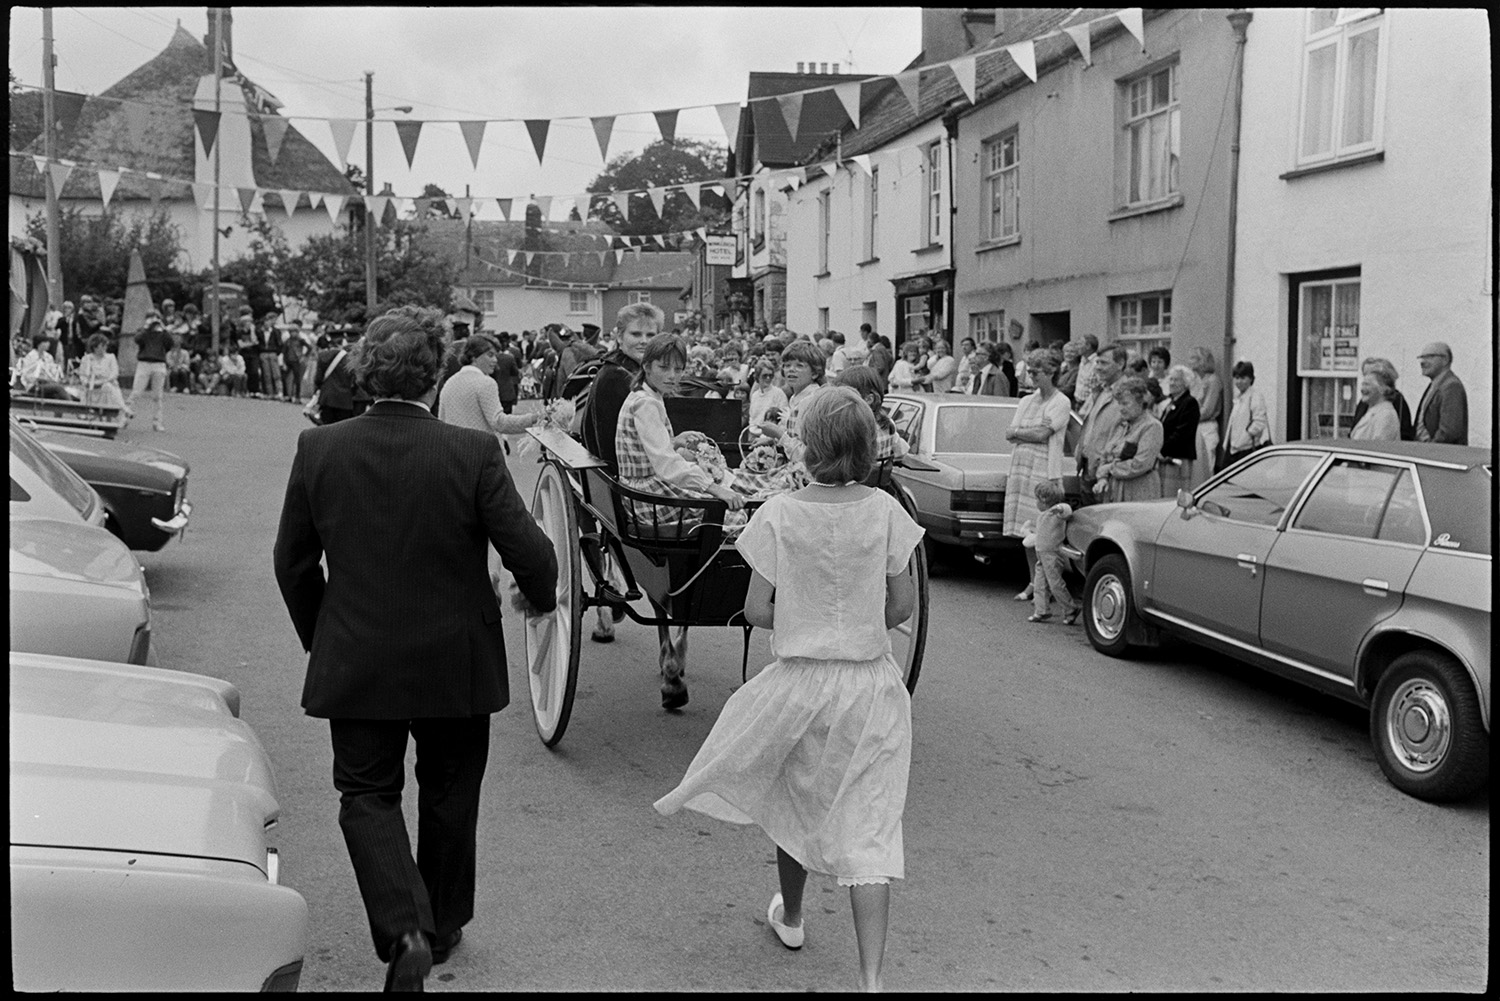 Fair Queen arriving in village in pony trap. 
[The Winkleigh Fair Queen arriving in Winkleigh Square for the start of the Fair in a horse drawn open carriage. A crowd has gathered to watch and the street is decorated with bunting.]